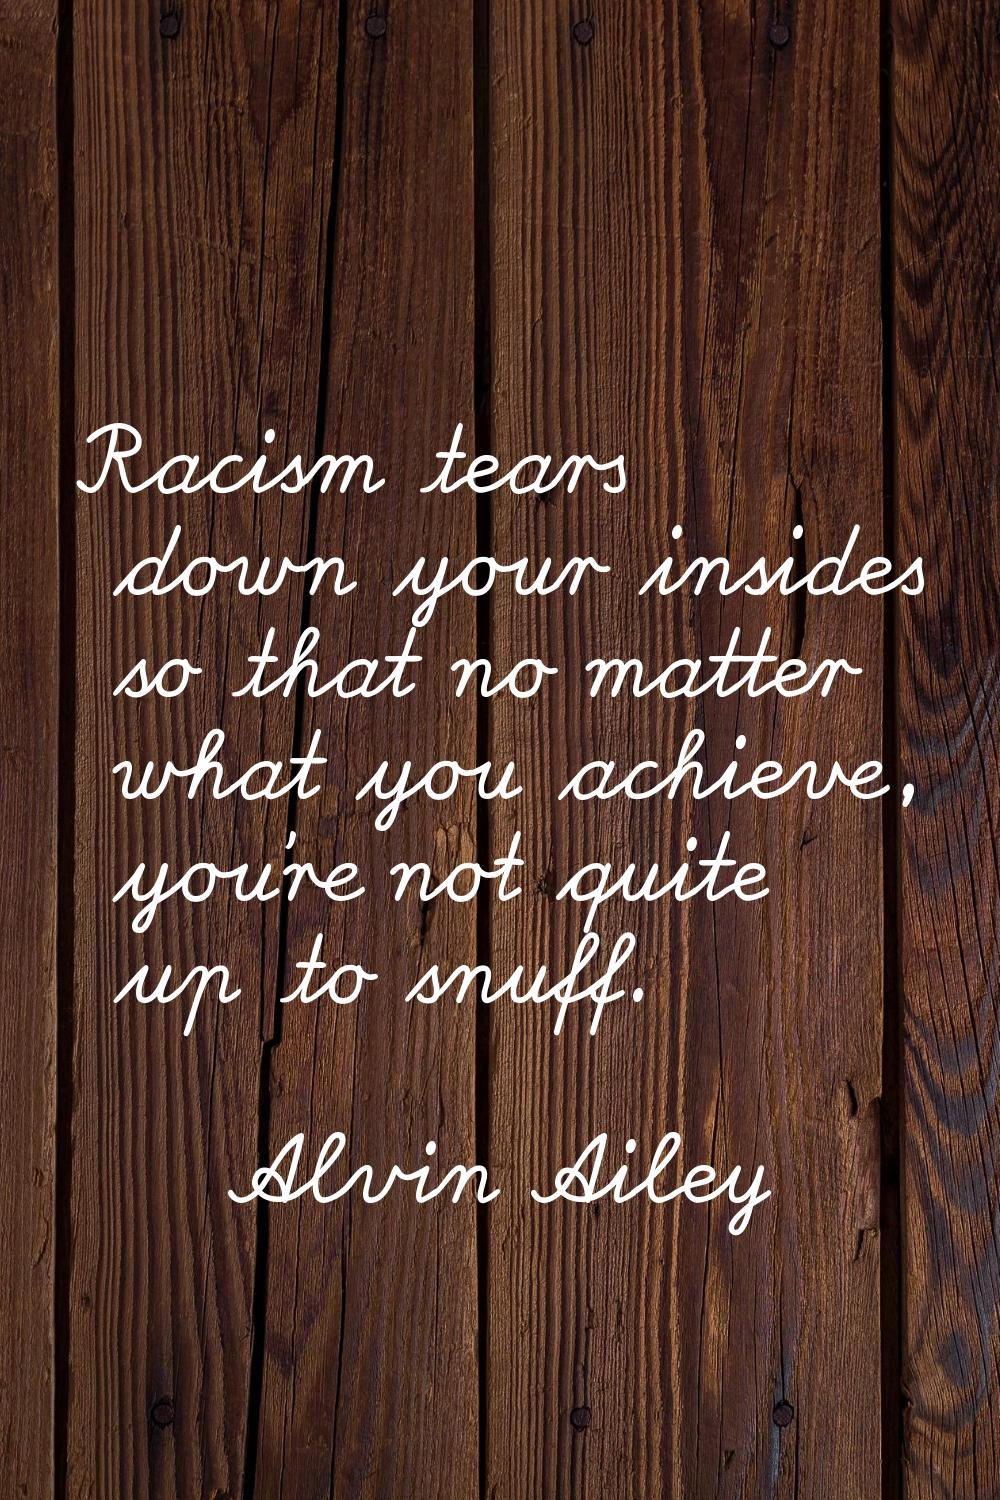 Racism tears down your insides so that no matter what you achieve, you're not quite up to snuff.